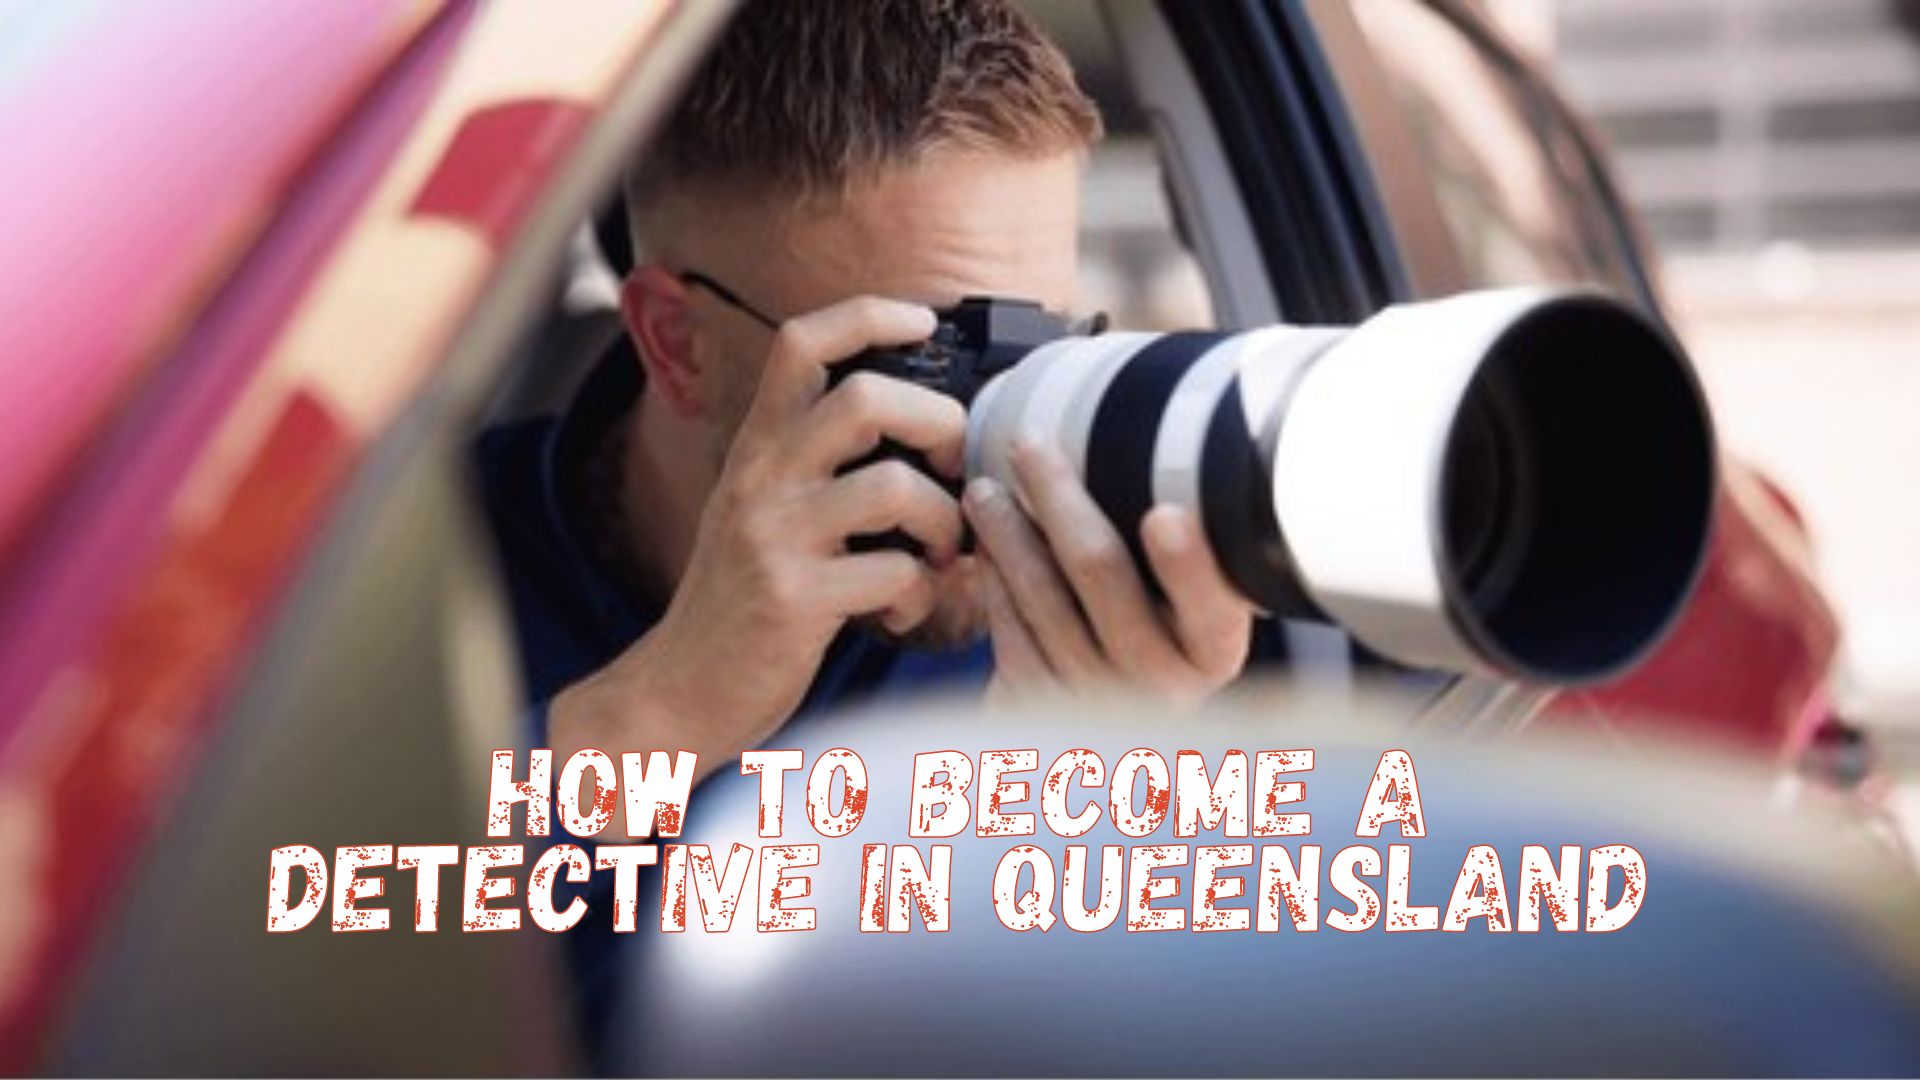 How to Become a Detective in Queensland